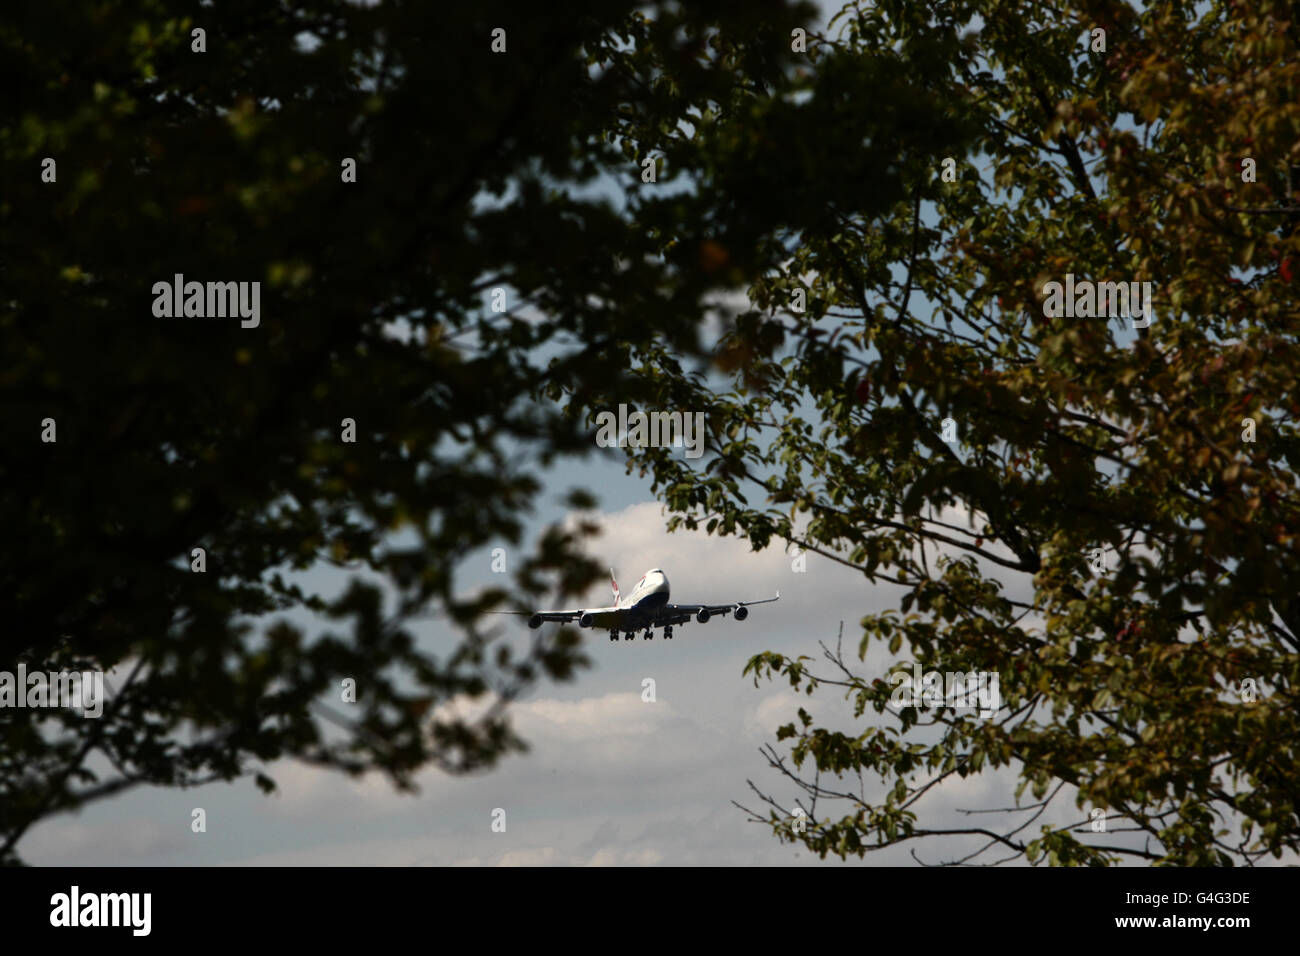 A British Airways plane lands over trees at Heathrow Airport in West London PRESS ASSOCIATION Photo. Picture date: Monday August 22, 2011 See PA story . Photo credit should read: Steve Parsons/PA Wire Stock Photo